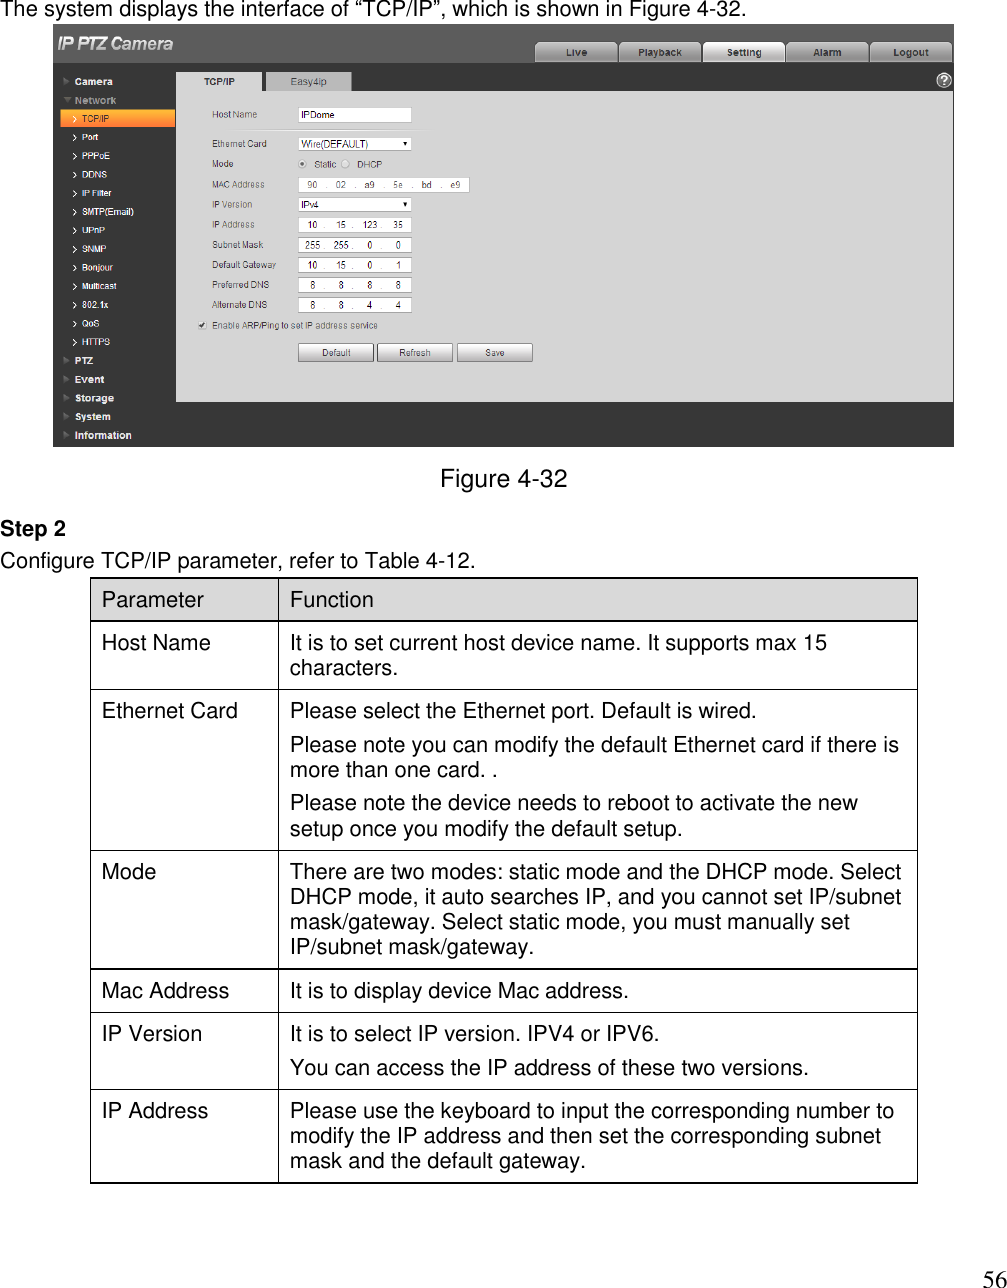                                                                              56 The system displays the interface of “TCP/IP”, which is shown in Figure 4-32.   Figure 4-32 Step 2  Configure TCP/IP parameter, refer to Table 4-12.  Parameter  Function  Host Name  It is to set current host device name. It supports max 15 characters.   Ethernet Card Please select the Ethernet port. Default is wired.  Please note you can modify the default Ethernet card if there is more than one card. . Please note the device needs to reboot to activate the new setup once you modify the default setup.  Mode There are two modes: static mode and the DHCP mode. Select DHCP mode, it auto searches IP, and you cannot set IP/subnet mask/gateway. Select static mode, you must manually set IP/subnet mask/gateway.  Mac Address  It is to display device Mac address.  IP Version  It is to select IP version. IPV4 or IPV6. You can access the IP address of these two versions. IP Address  Please use the keyboard to input the corresponding number to modify the IP address and then set the corresponding subnet mask and the default gateway.  